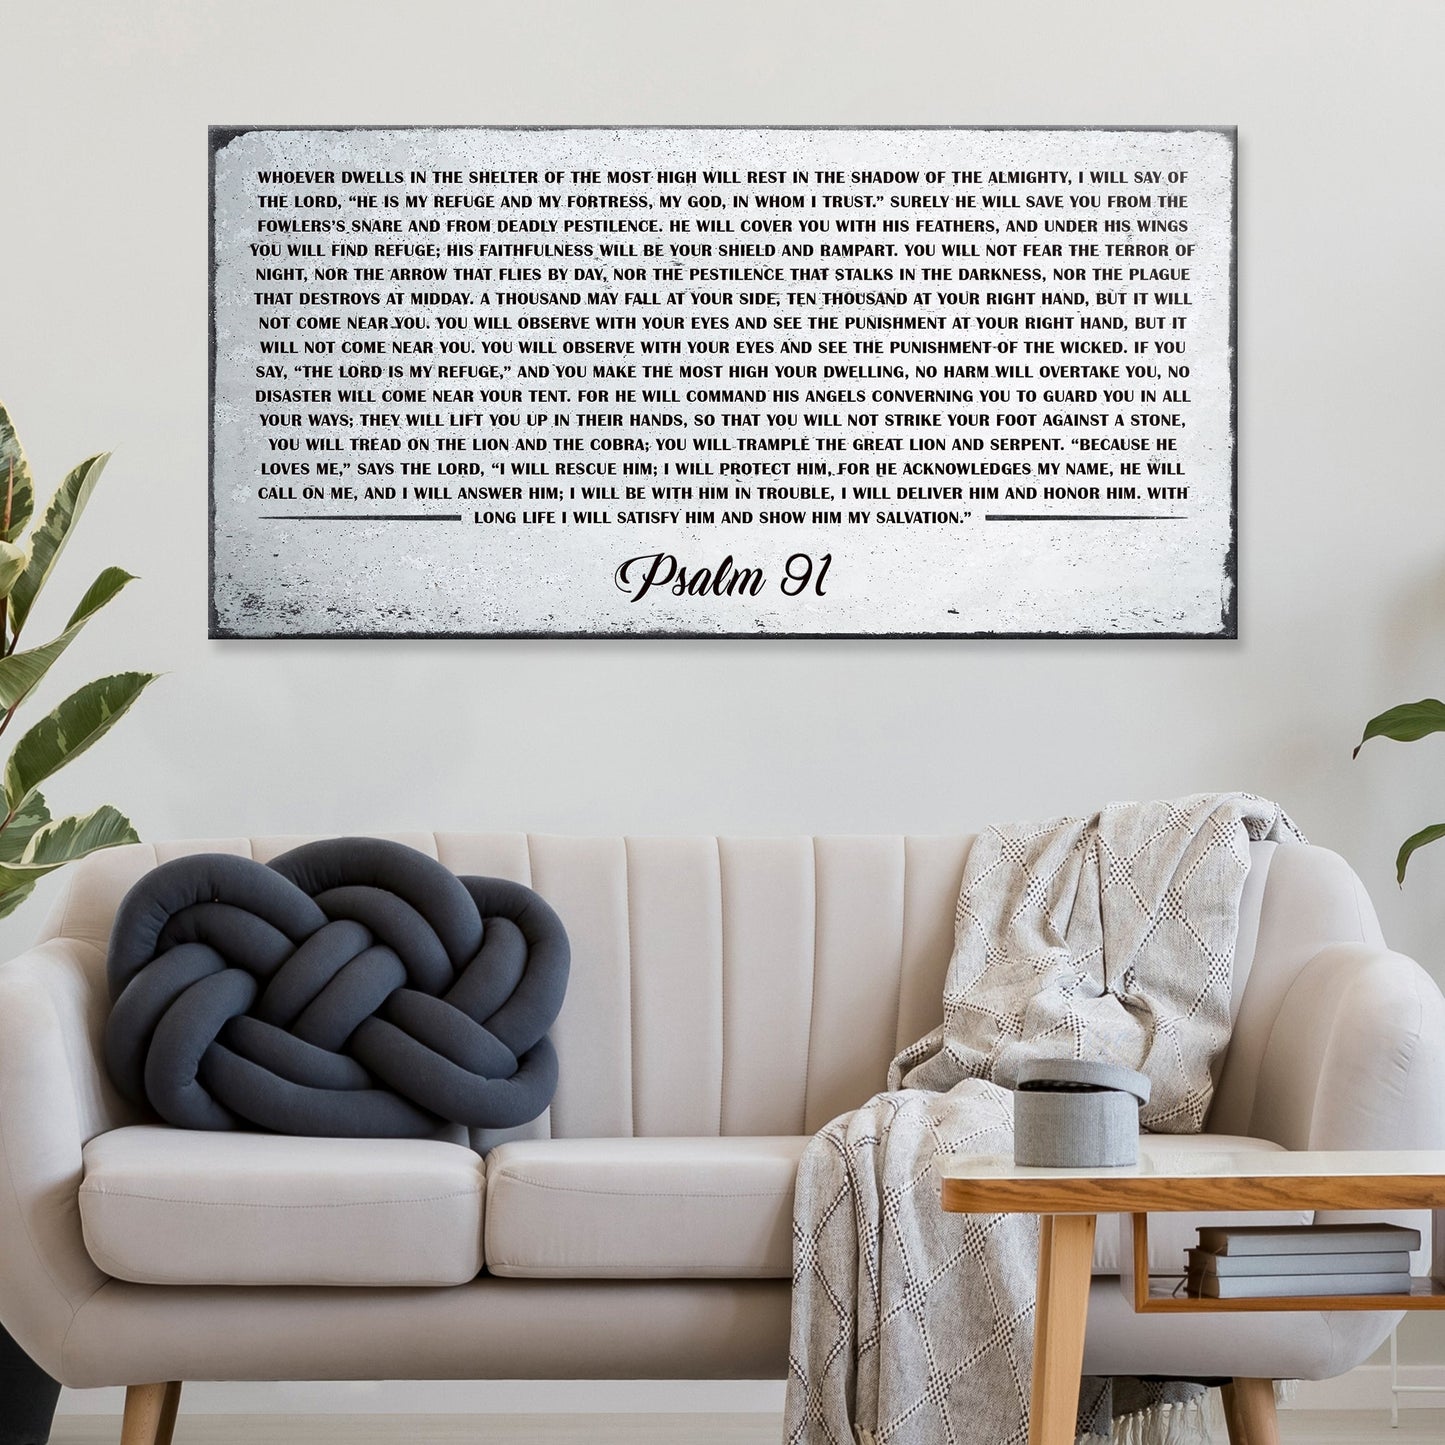 Psalm 91 - Whoever Dwells In The Shelter Of The Most High Sign IV - Image by Tailored Canvases